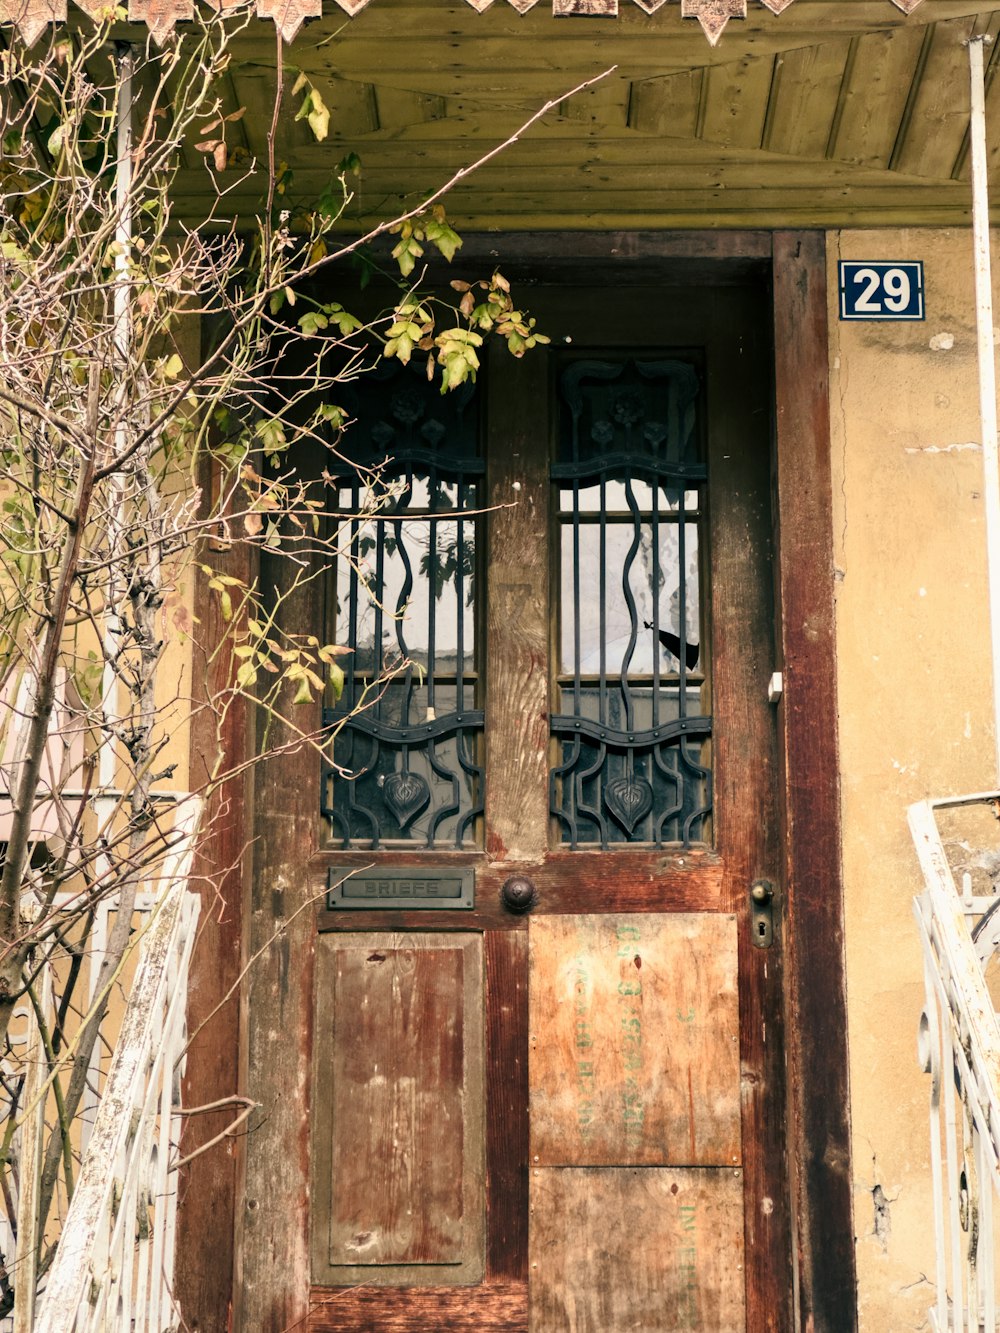 a wooden door with wrought iron bars and a number 29 sign